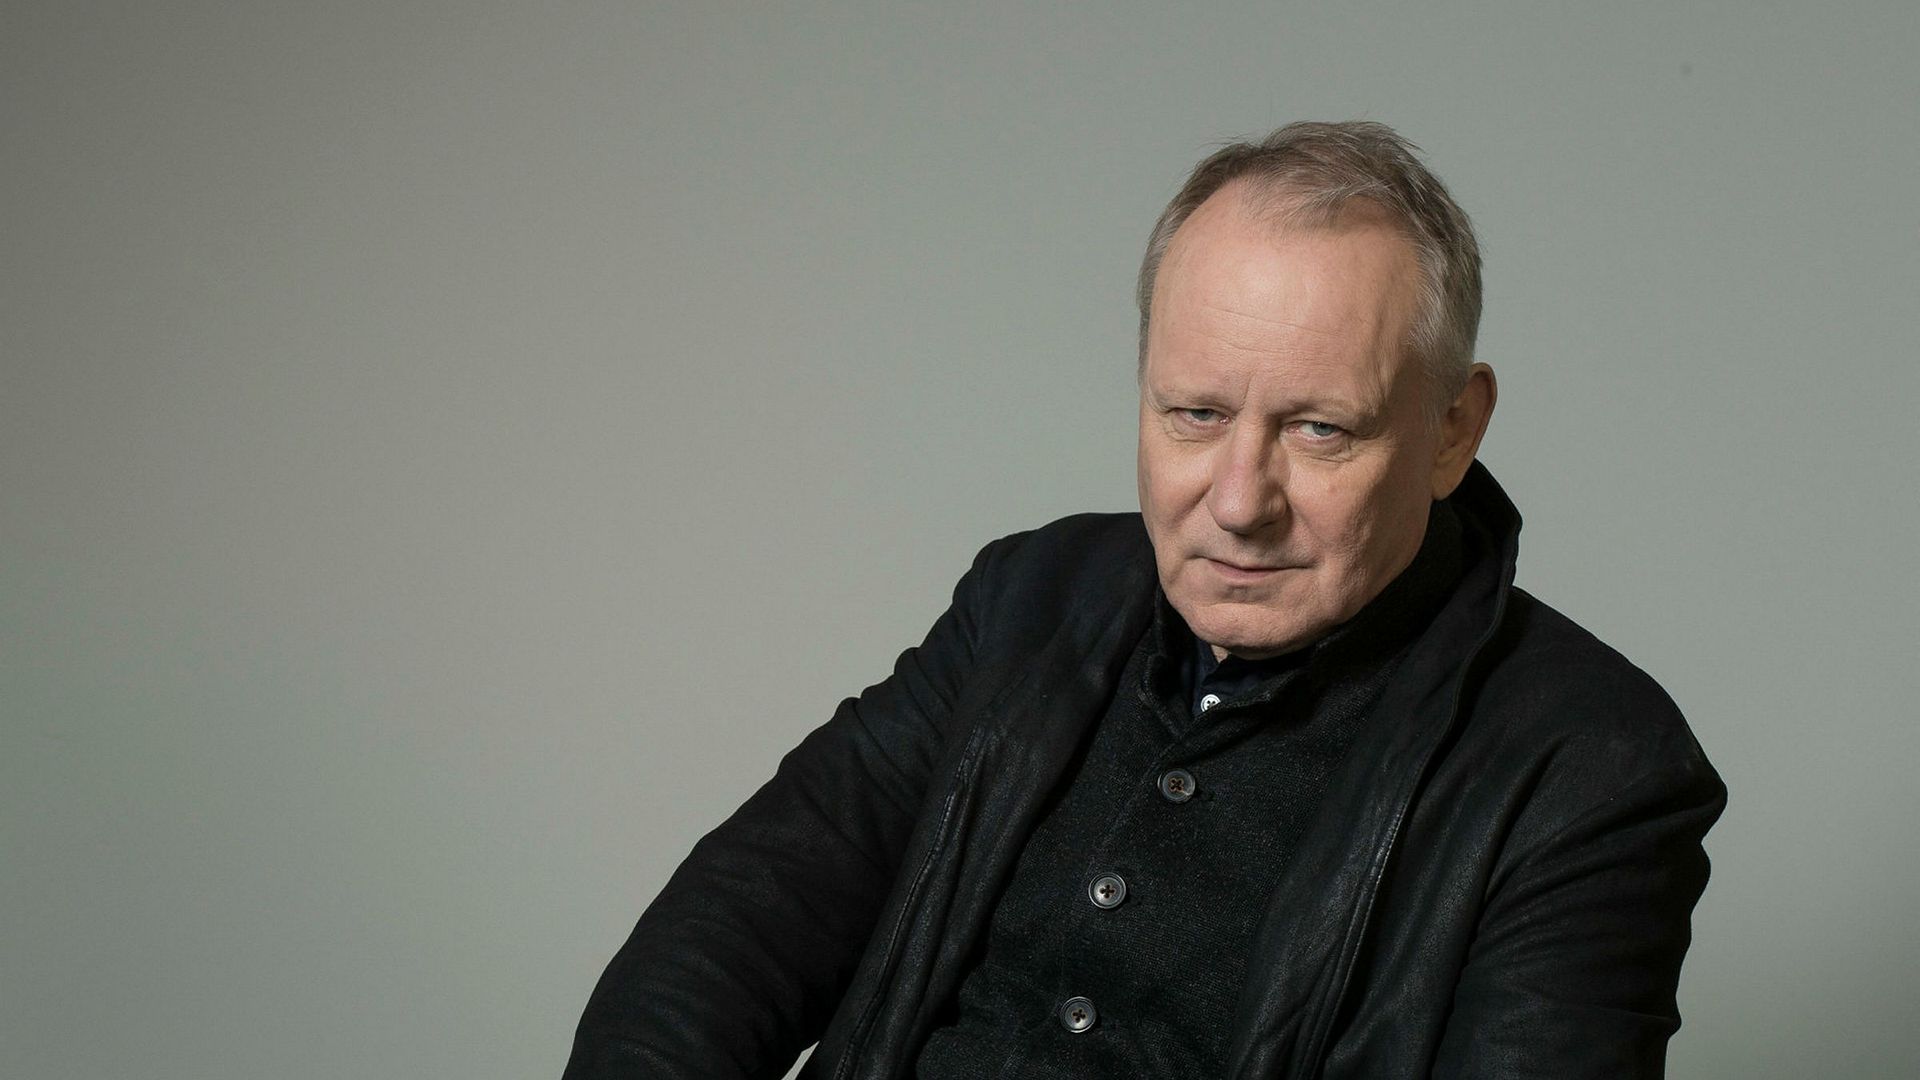 In this article, we are going to be covering which character in Star Wars Andor is Stellan Skarsgard, as the Swedish actor once again works with Disney.